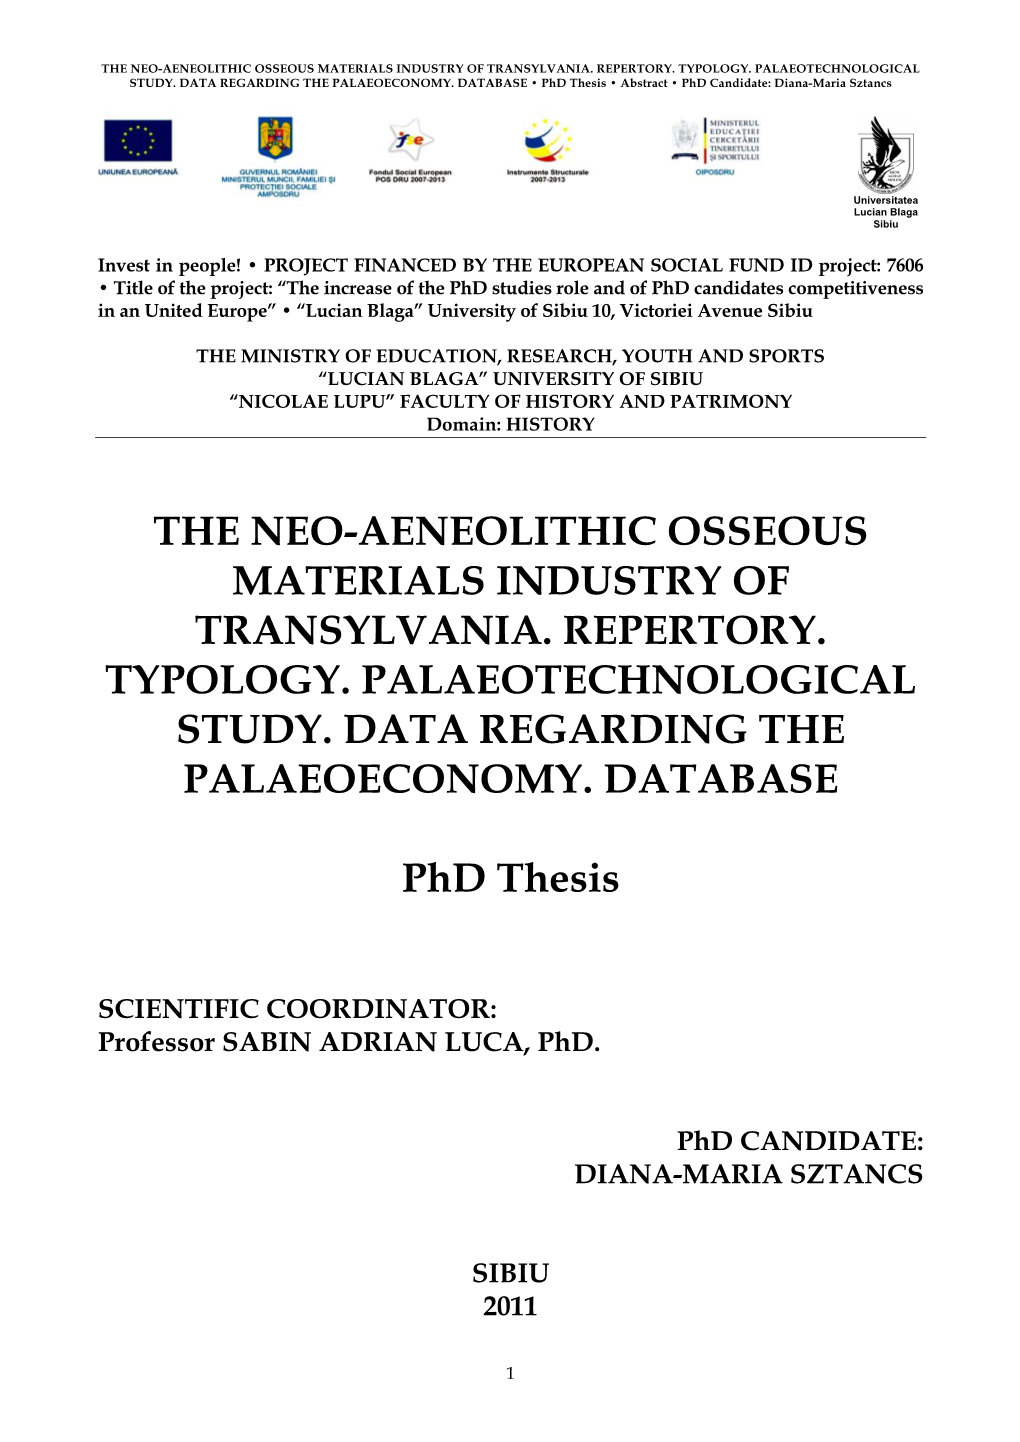 The Neo-Aeneolithic Osseous Materials Industry of Transylvania